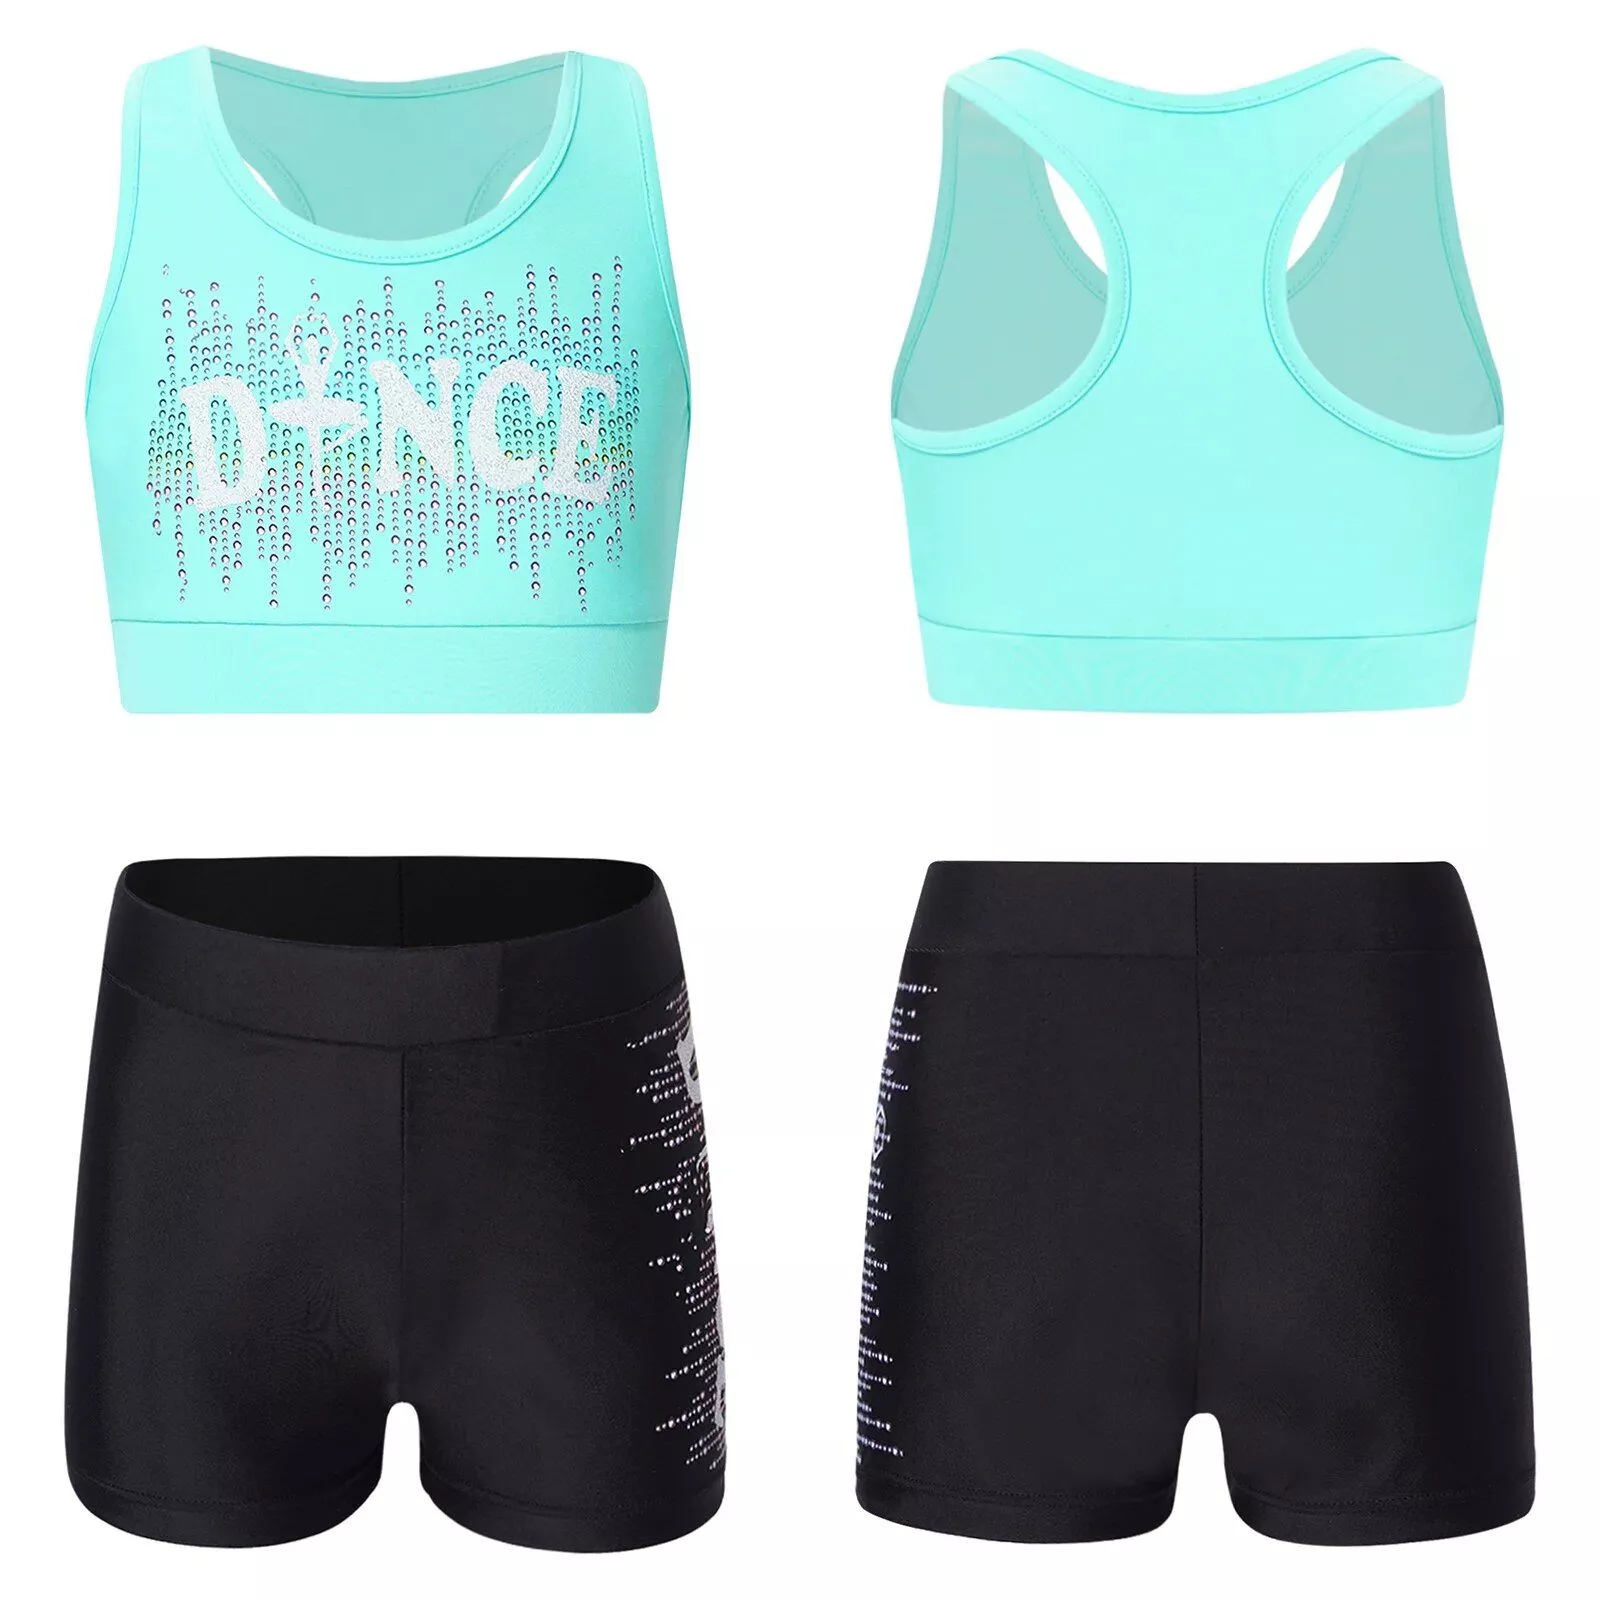 Girls’ Sporty Dance & Gymnastics Outfit – Sleeveless Crop Top & Athletic Shorts Set